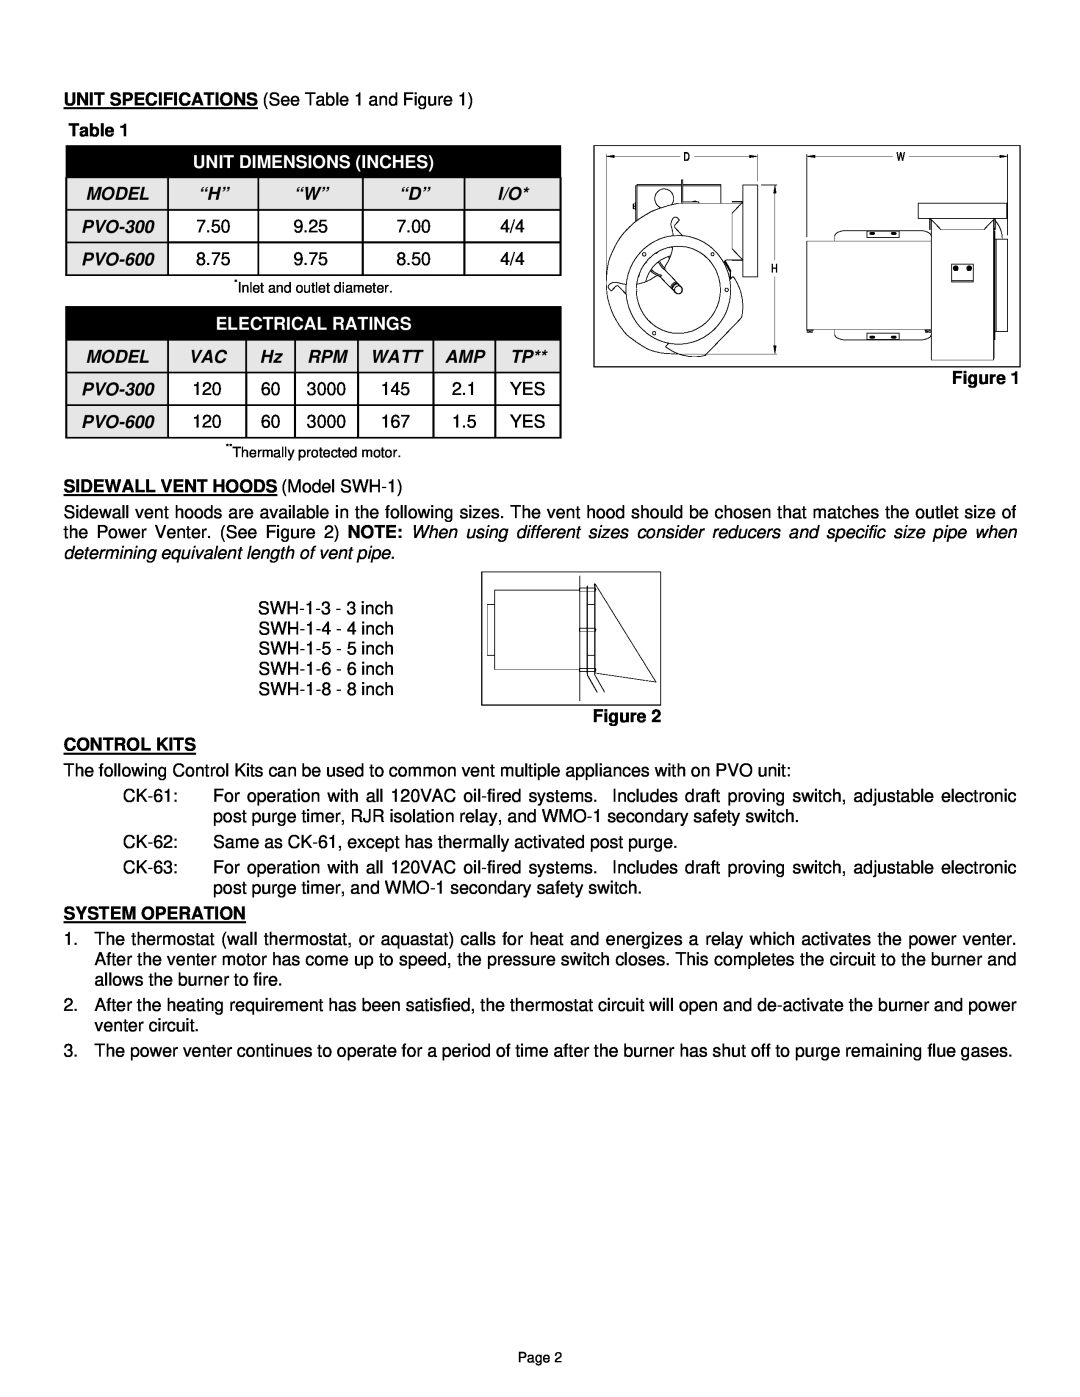 Field Controls PVO-600 specifications Unit Dimensions Inches, Model, PVO-300, Electrical Ratings 